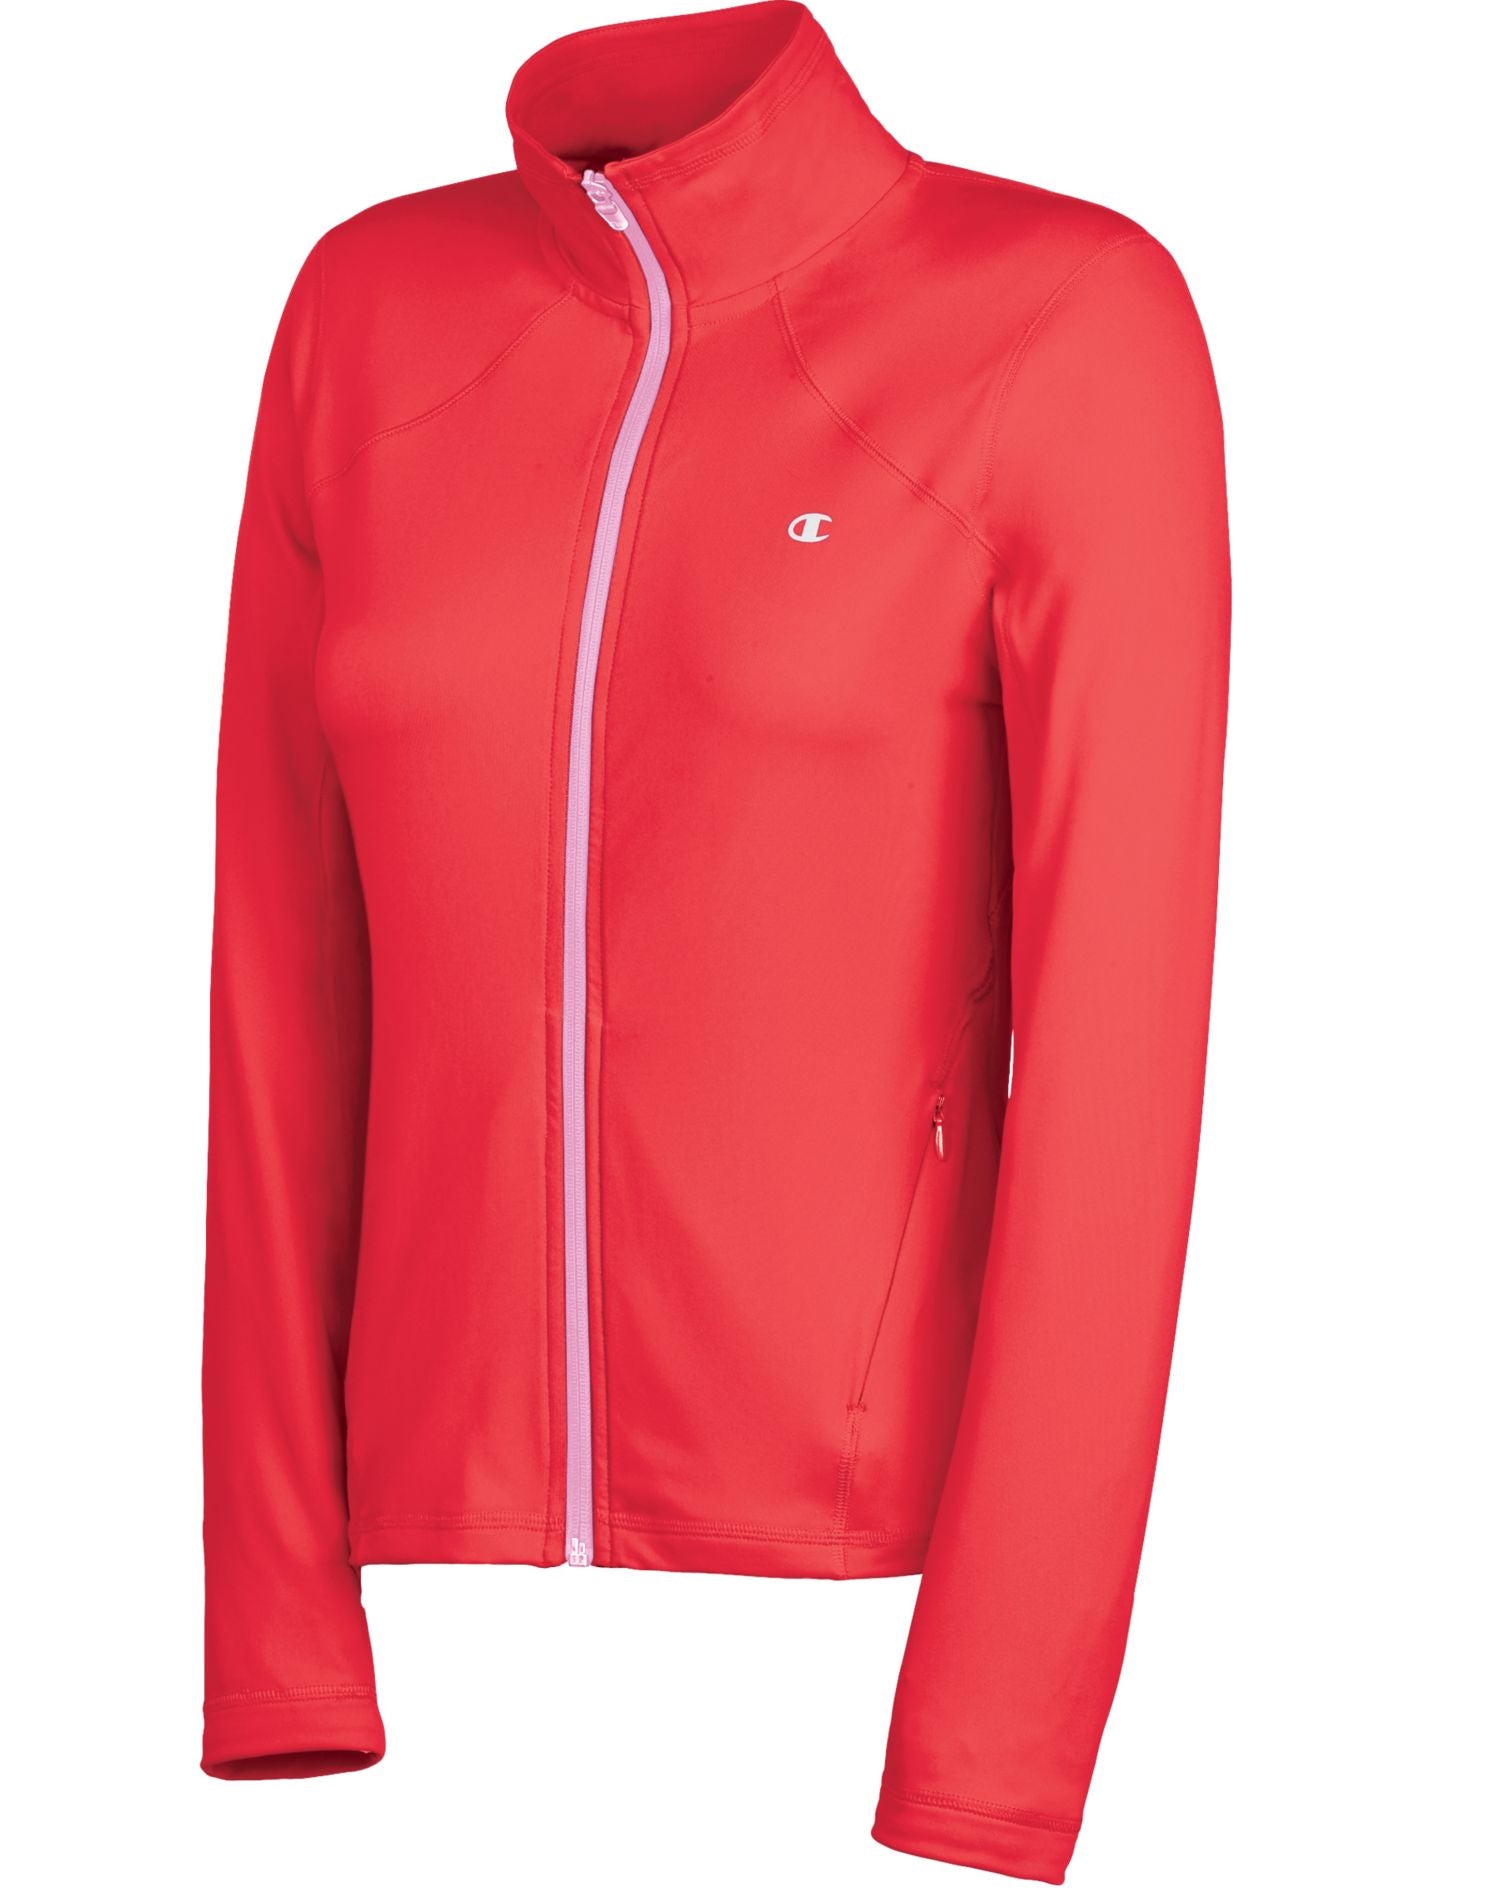 champion women's double dry absolute workout jacket